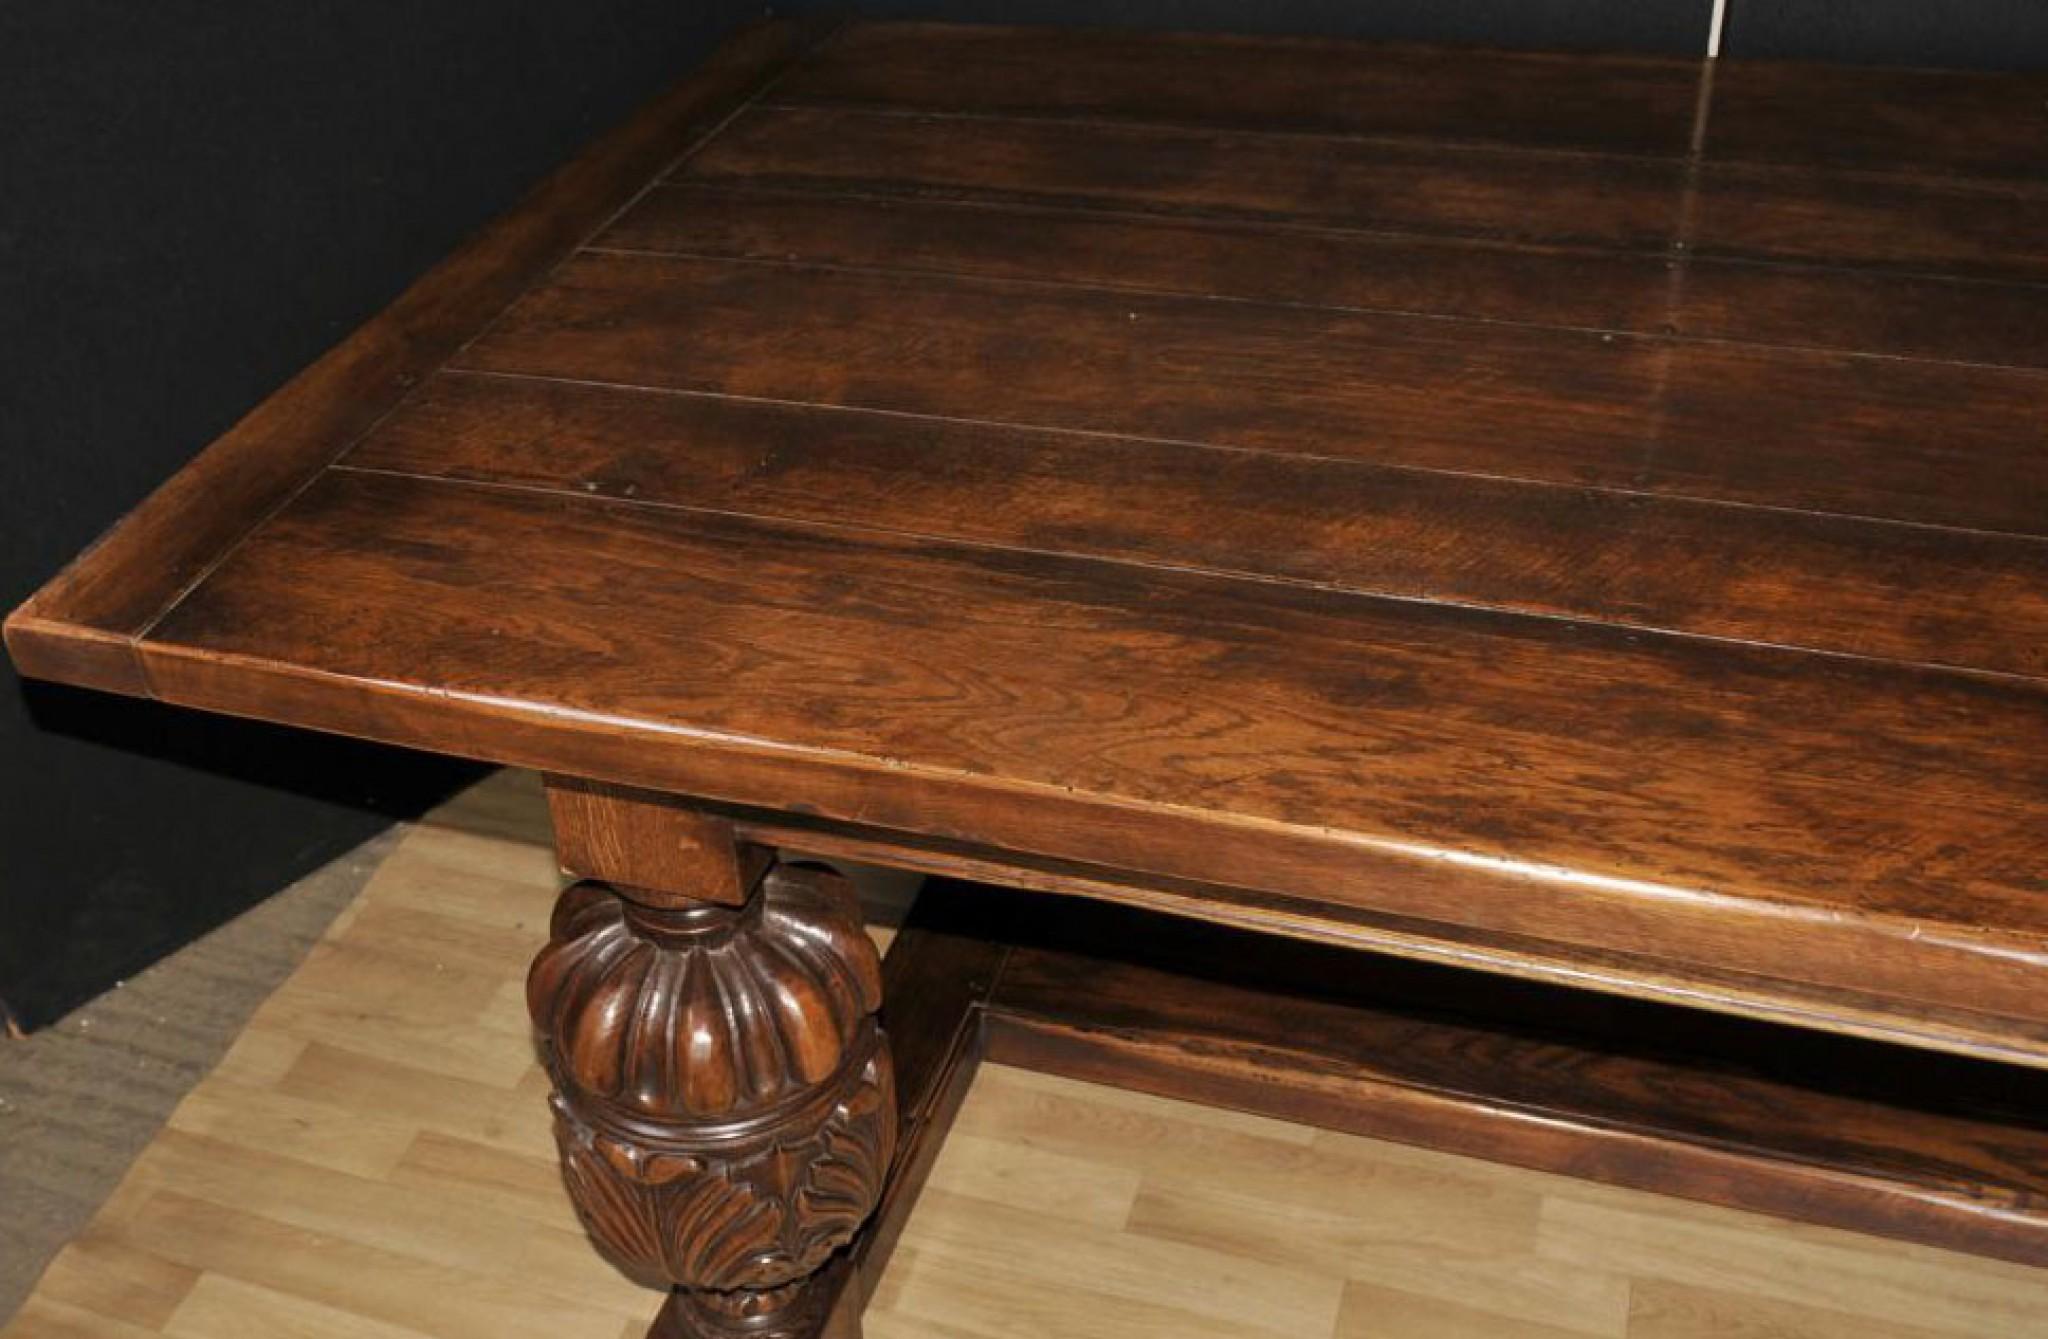 Large Refectory Table - French Farmhouse Oak Kitchen Dining Tables For Sale 5